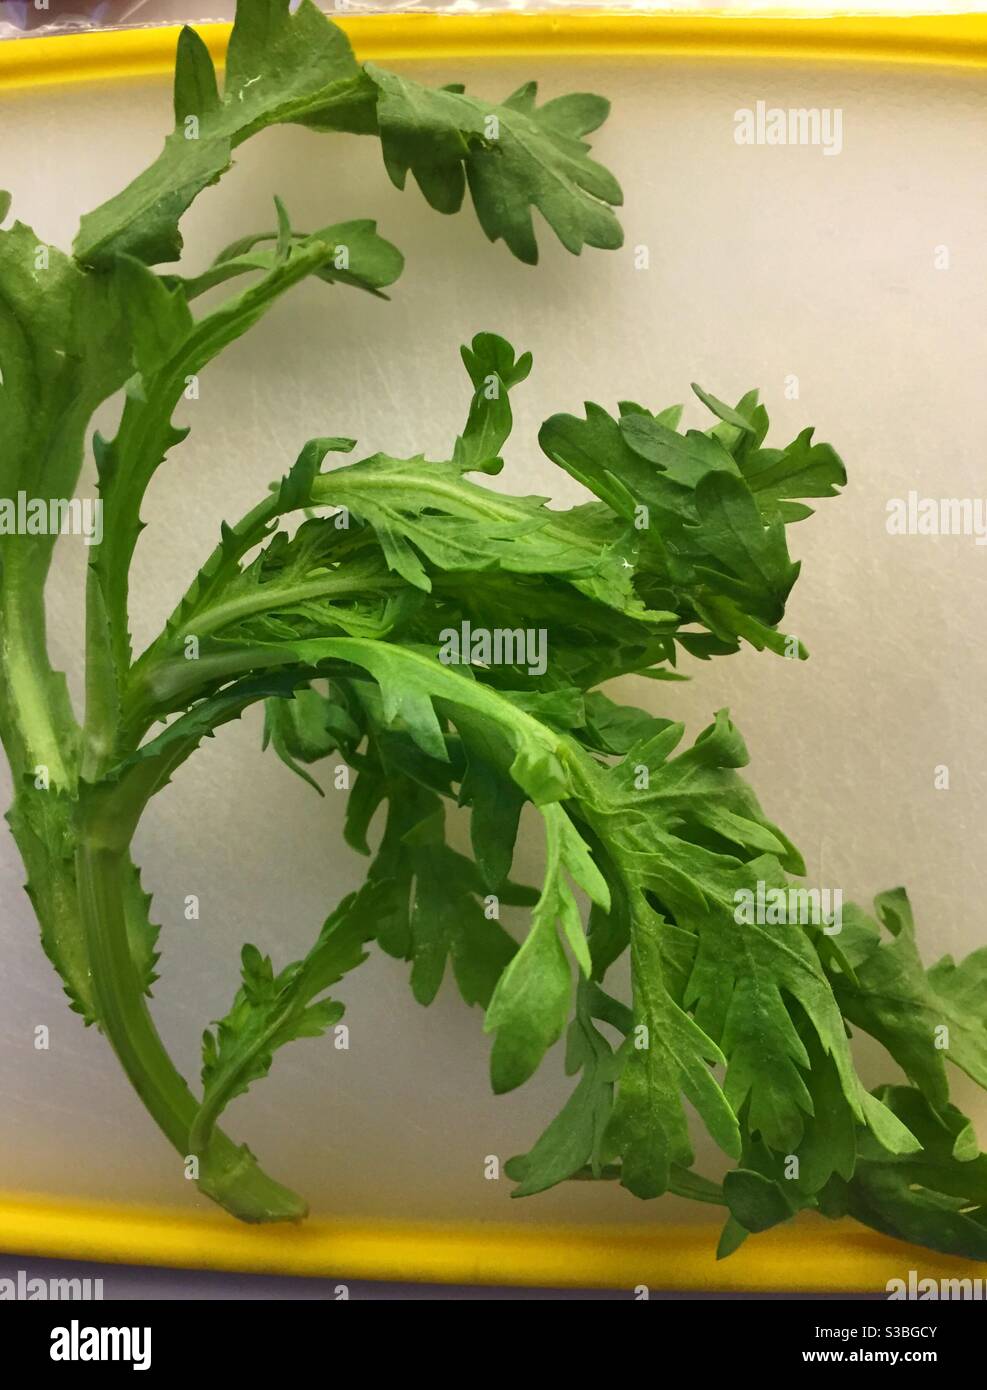 Close up of fresh Japanese mustard greens on a white plate Stock Photo